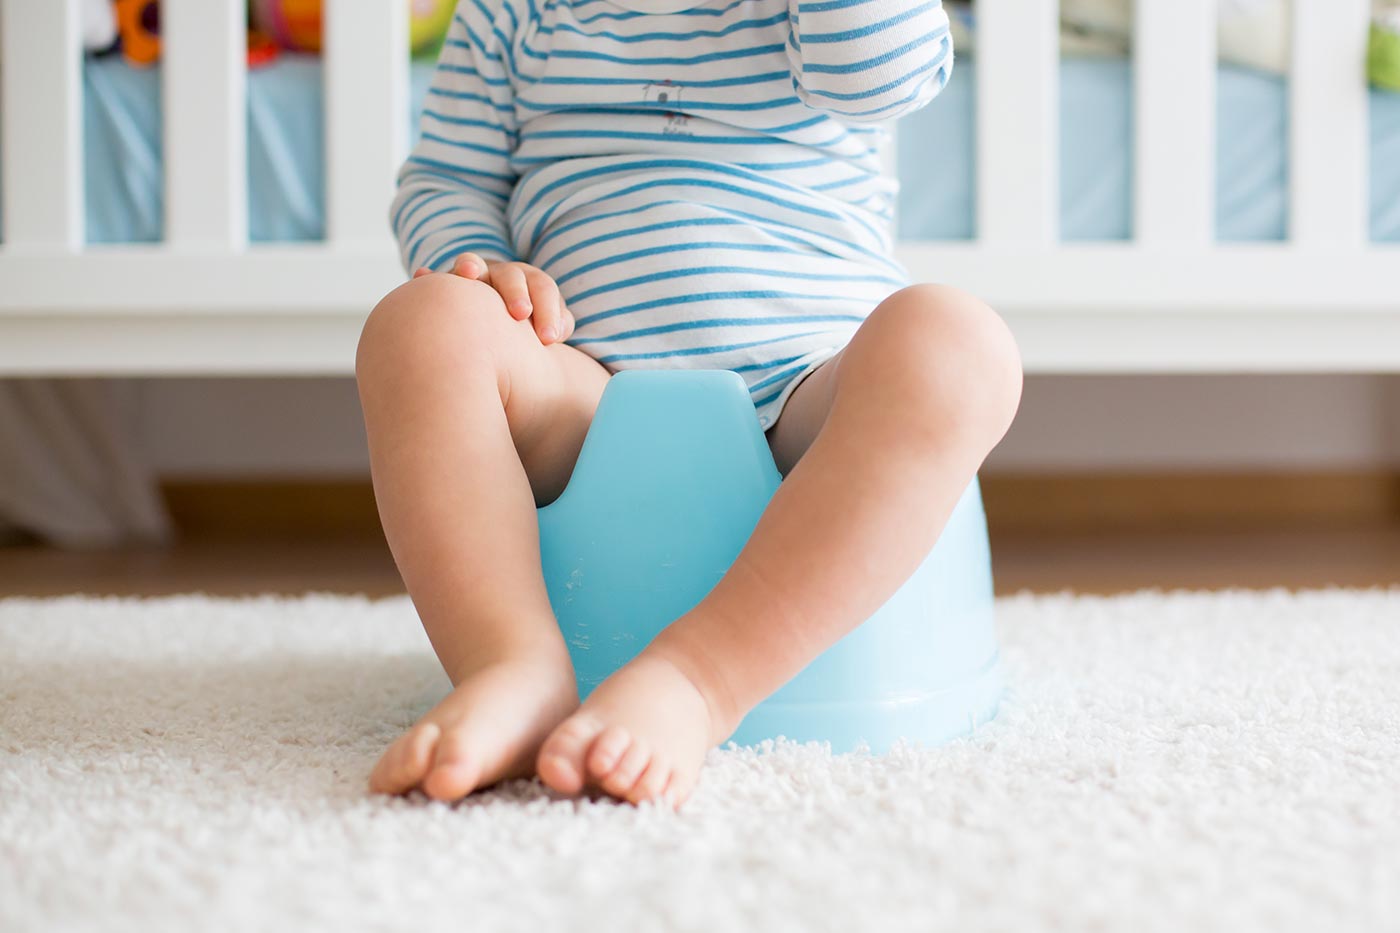 How to Potty Train a Toddler